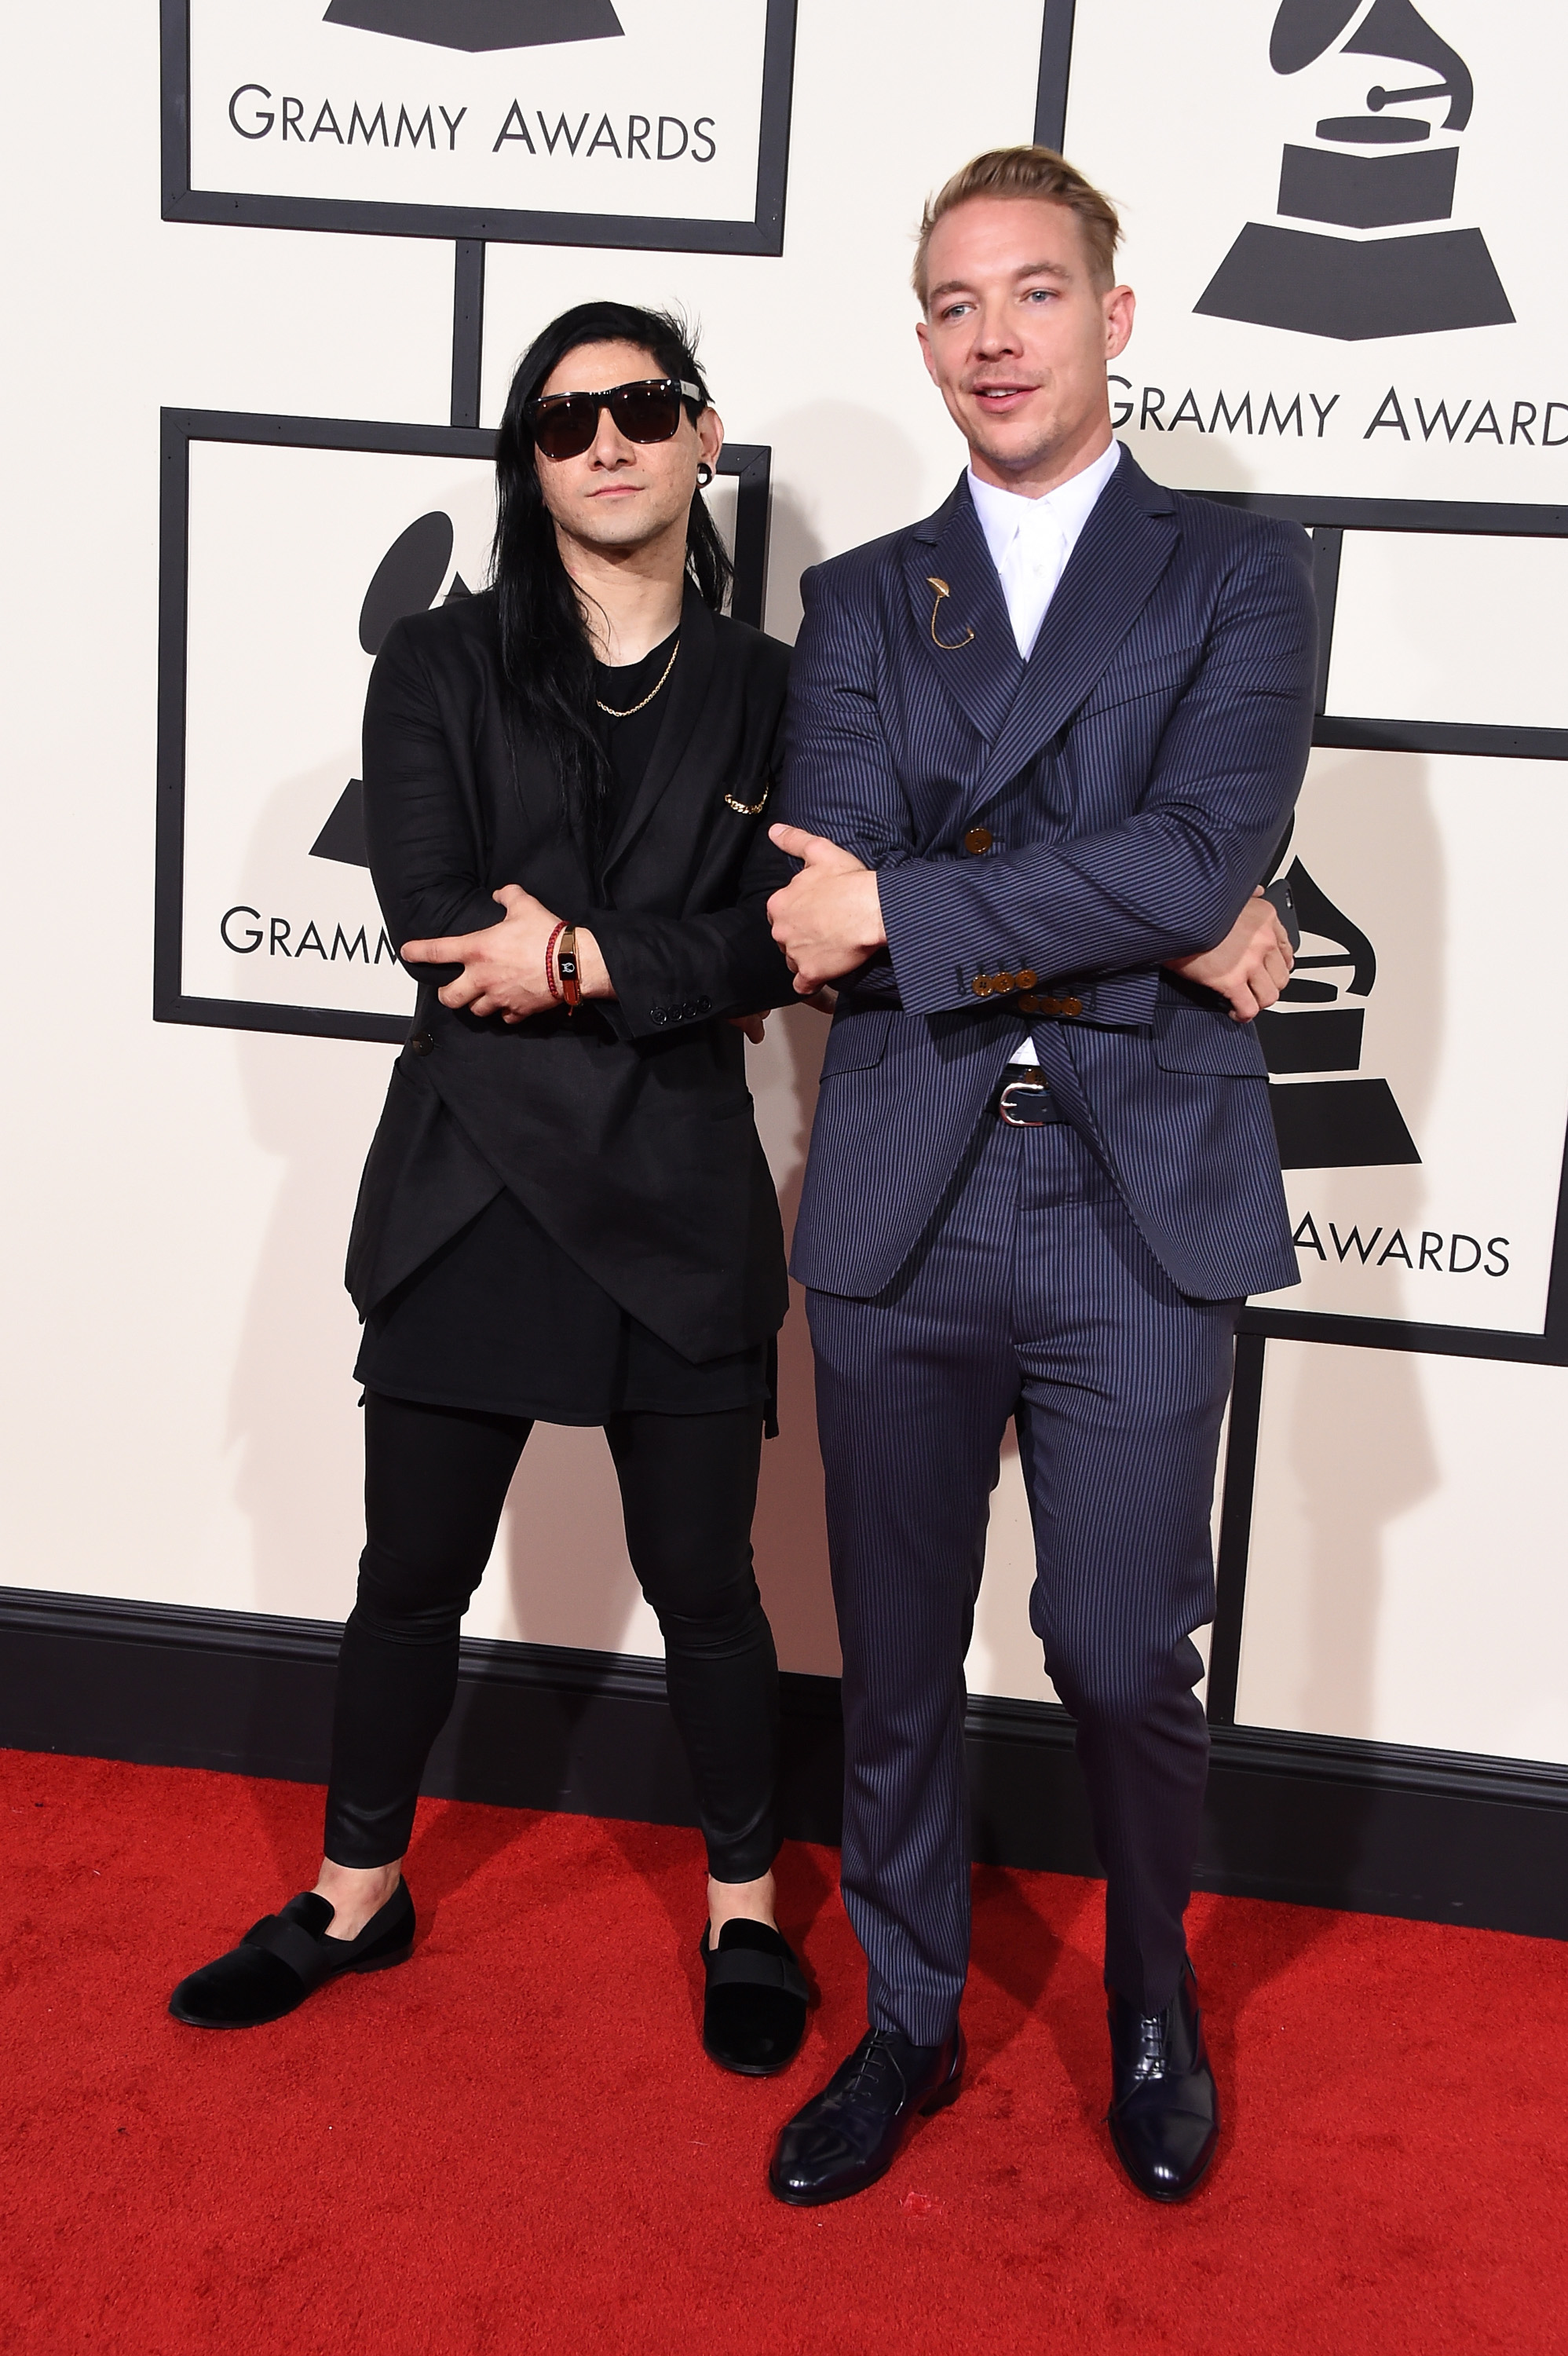 Skrillex, left, and Diplo, right, attend the 58th GRAMMY Awards at Staples Center on Feb. 15, 2016 in Los Angeles.